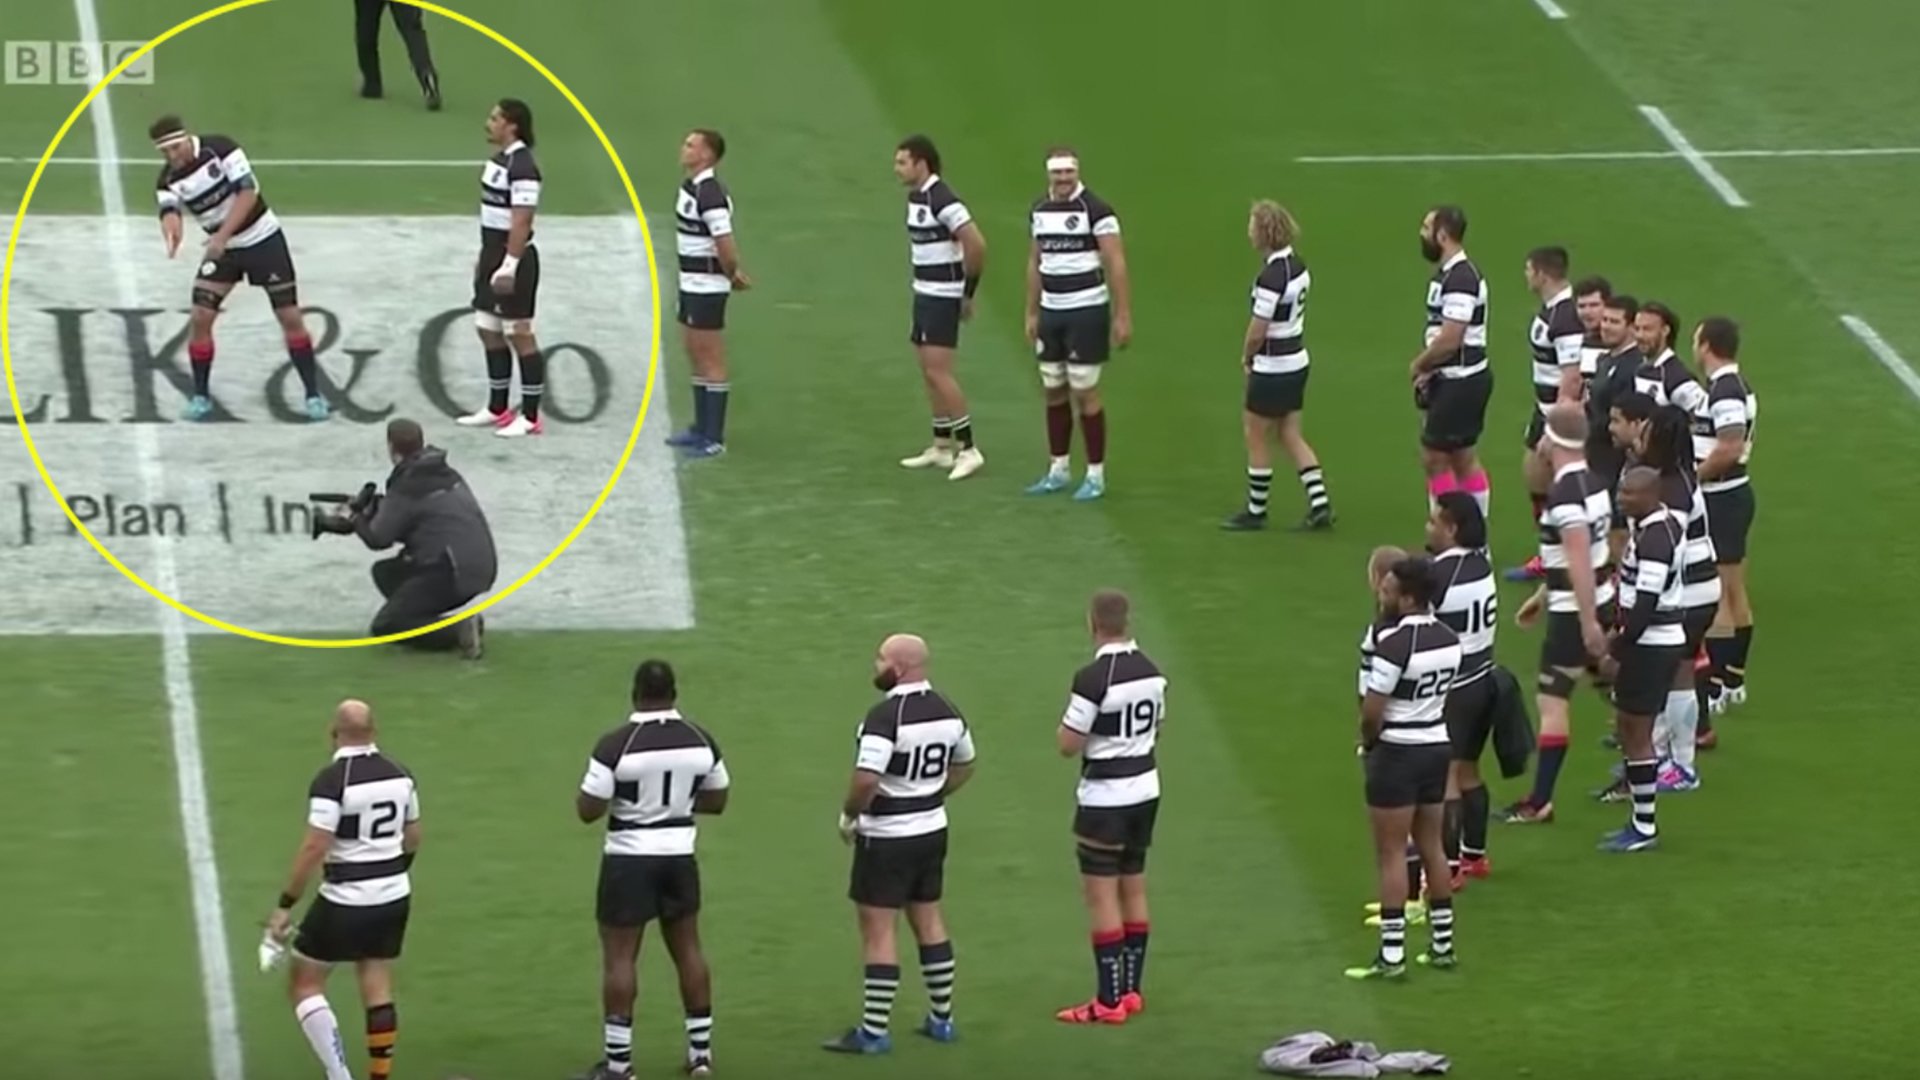 The Barbarians recreate England's V formation against Fiji